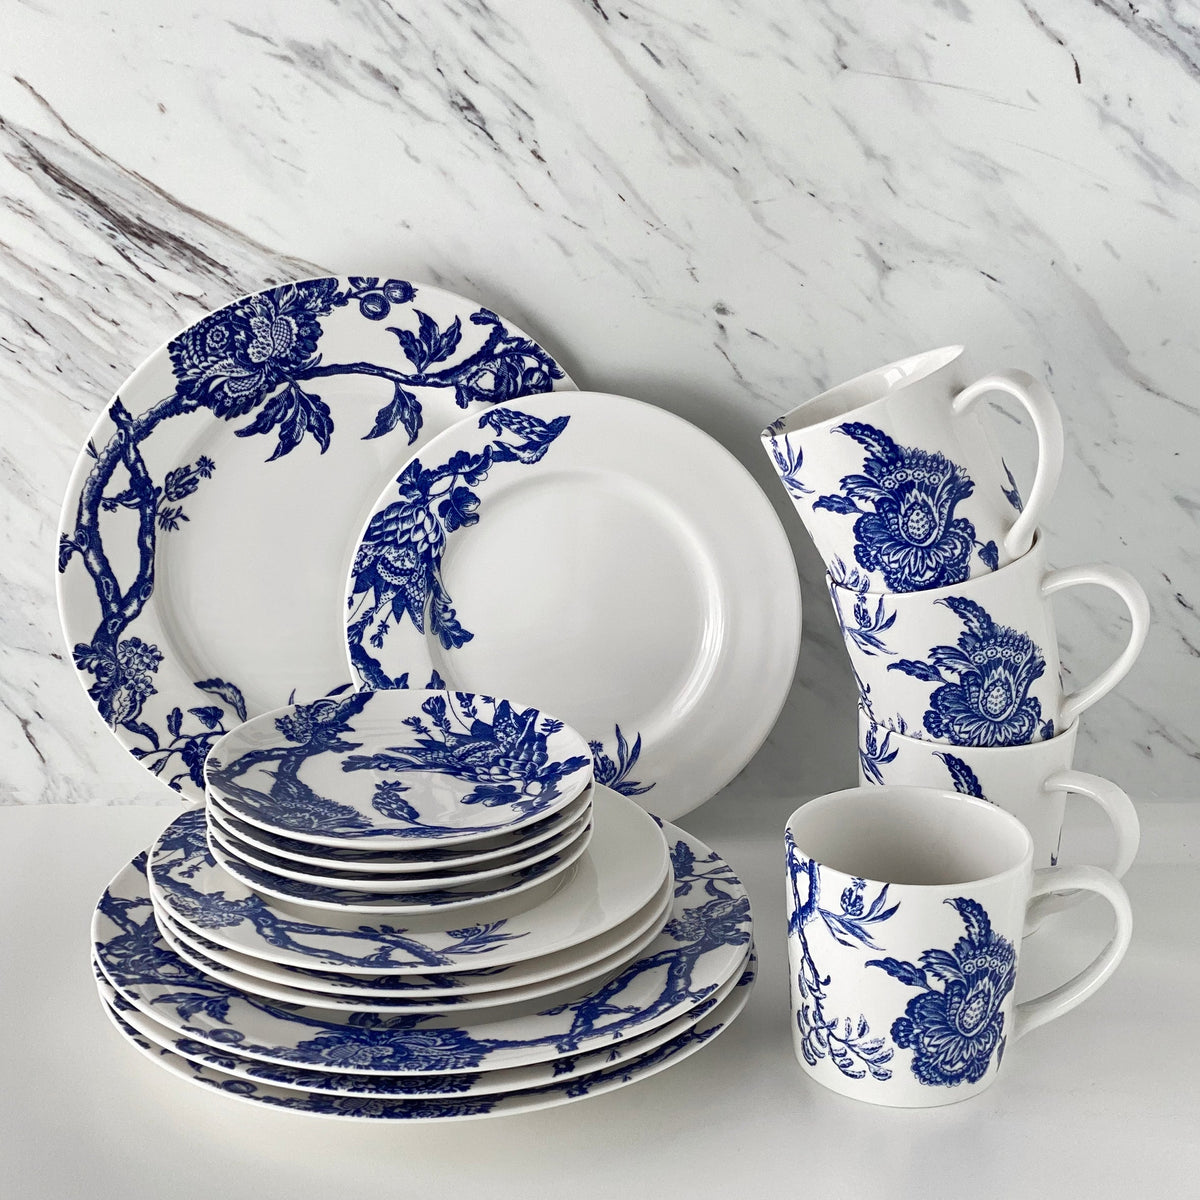 The Arcadia Blue 16 Piece Dinnerware Set by Caskata includes four each dinner, salad and canape plates as well as four wide mouth mugs.